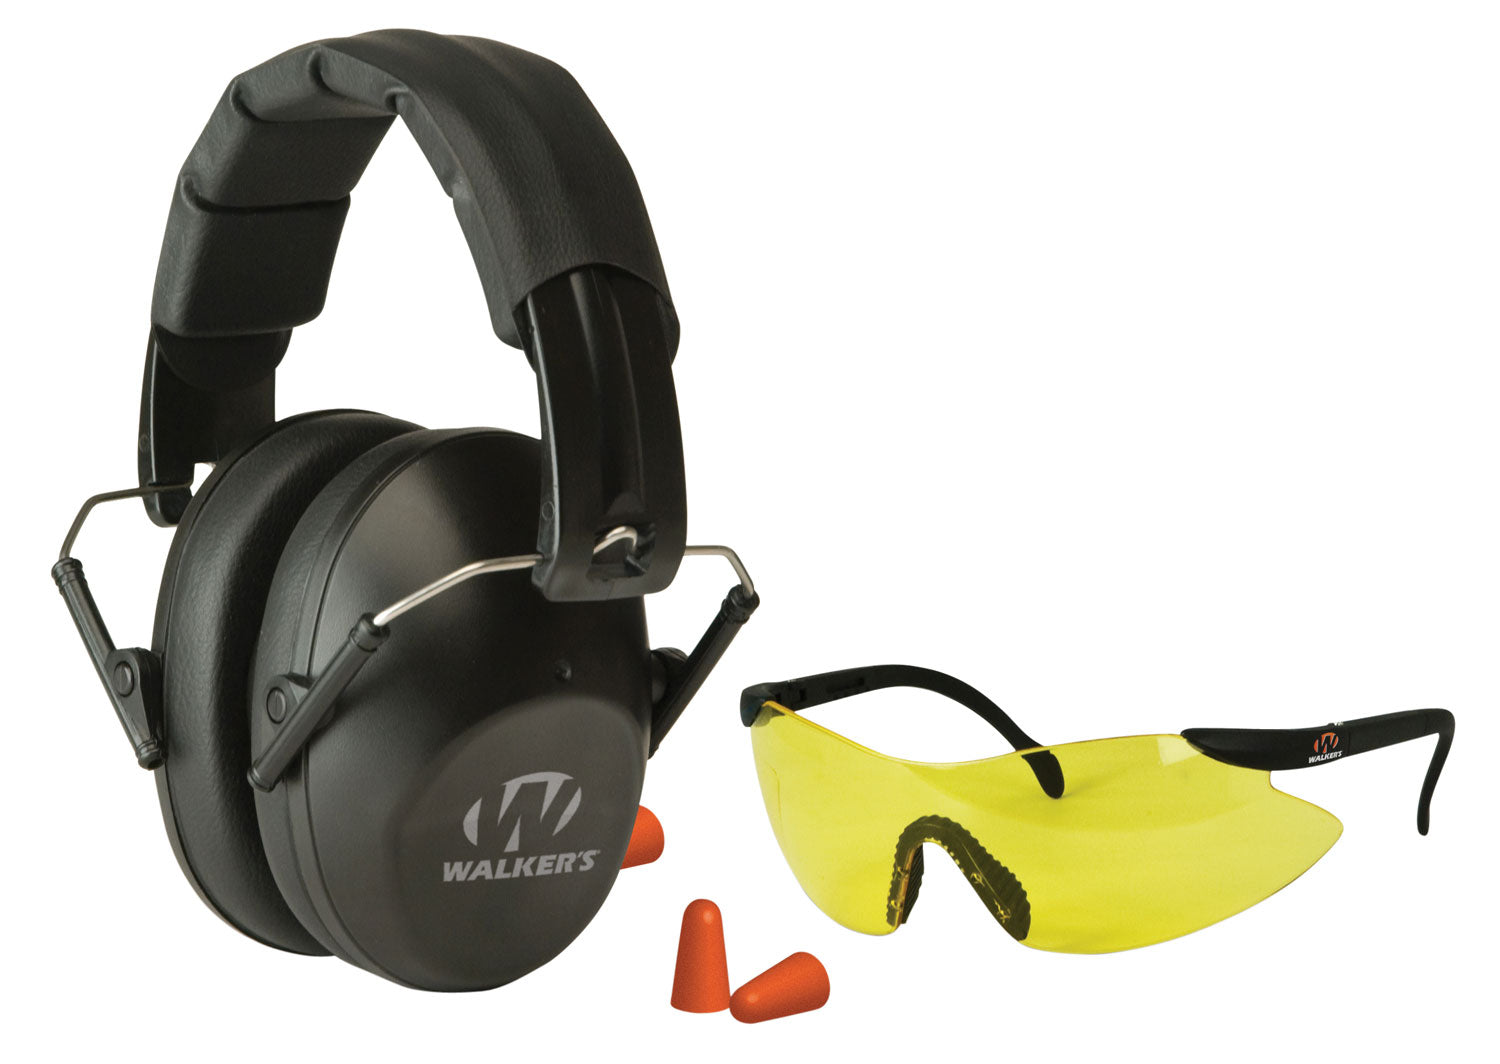 Walkers GWPFPM1GFP Pro Low Profile Passive Muff Combo Kit Includes Foam Ear Plugs, Low Profile 31 Db Over The Head Passive Muff, Shooting Glasses W/Yellow Lens